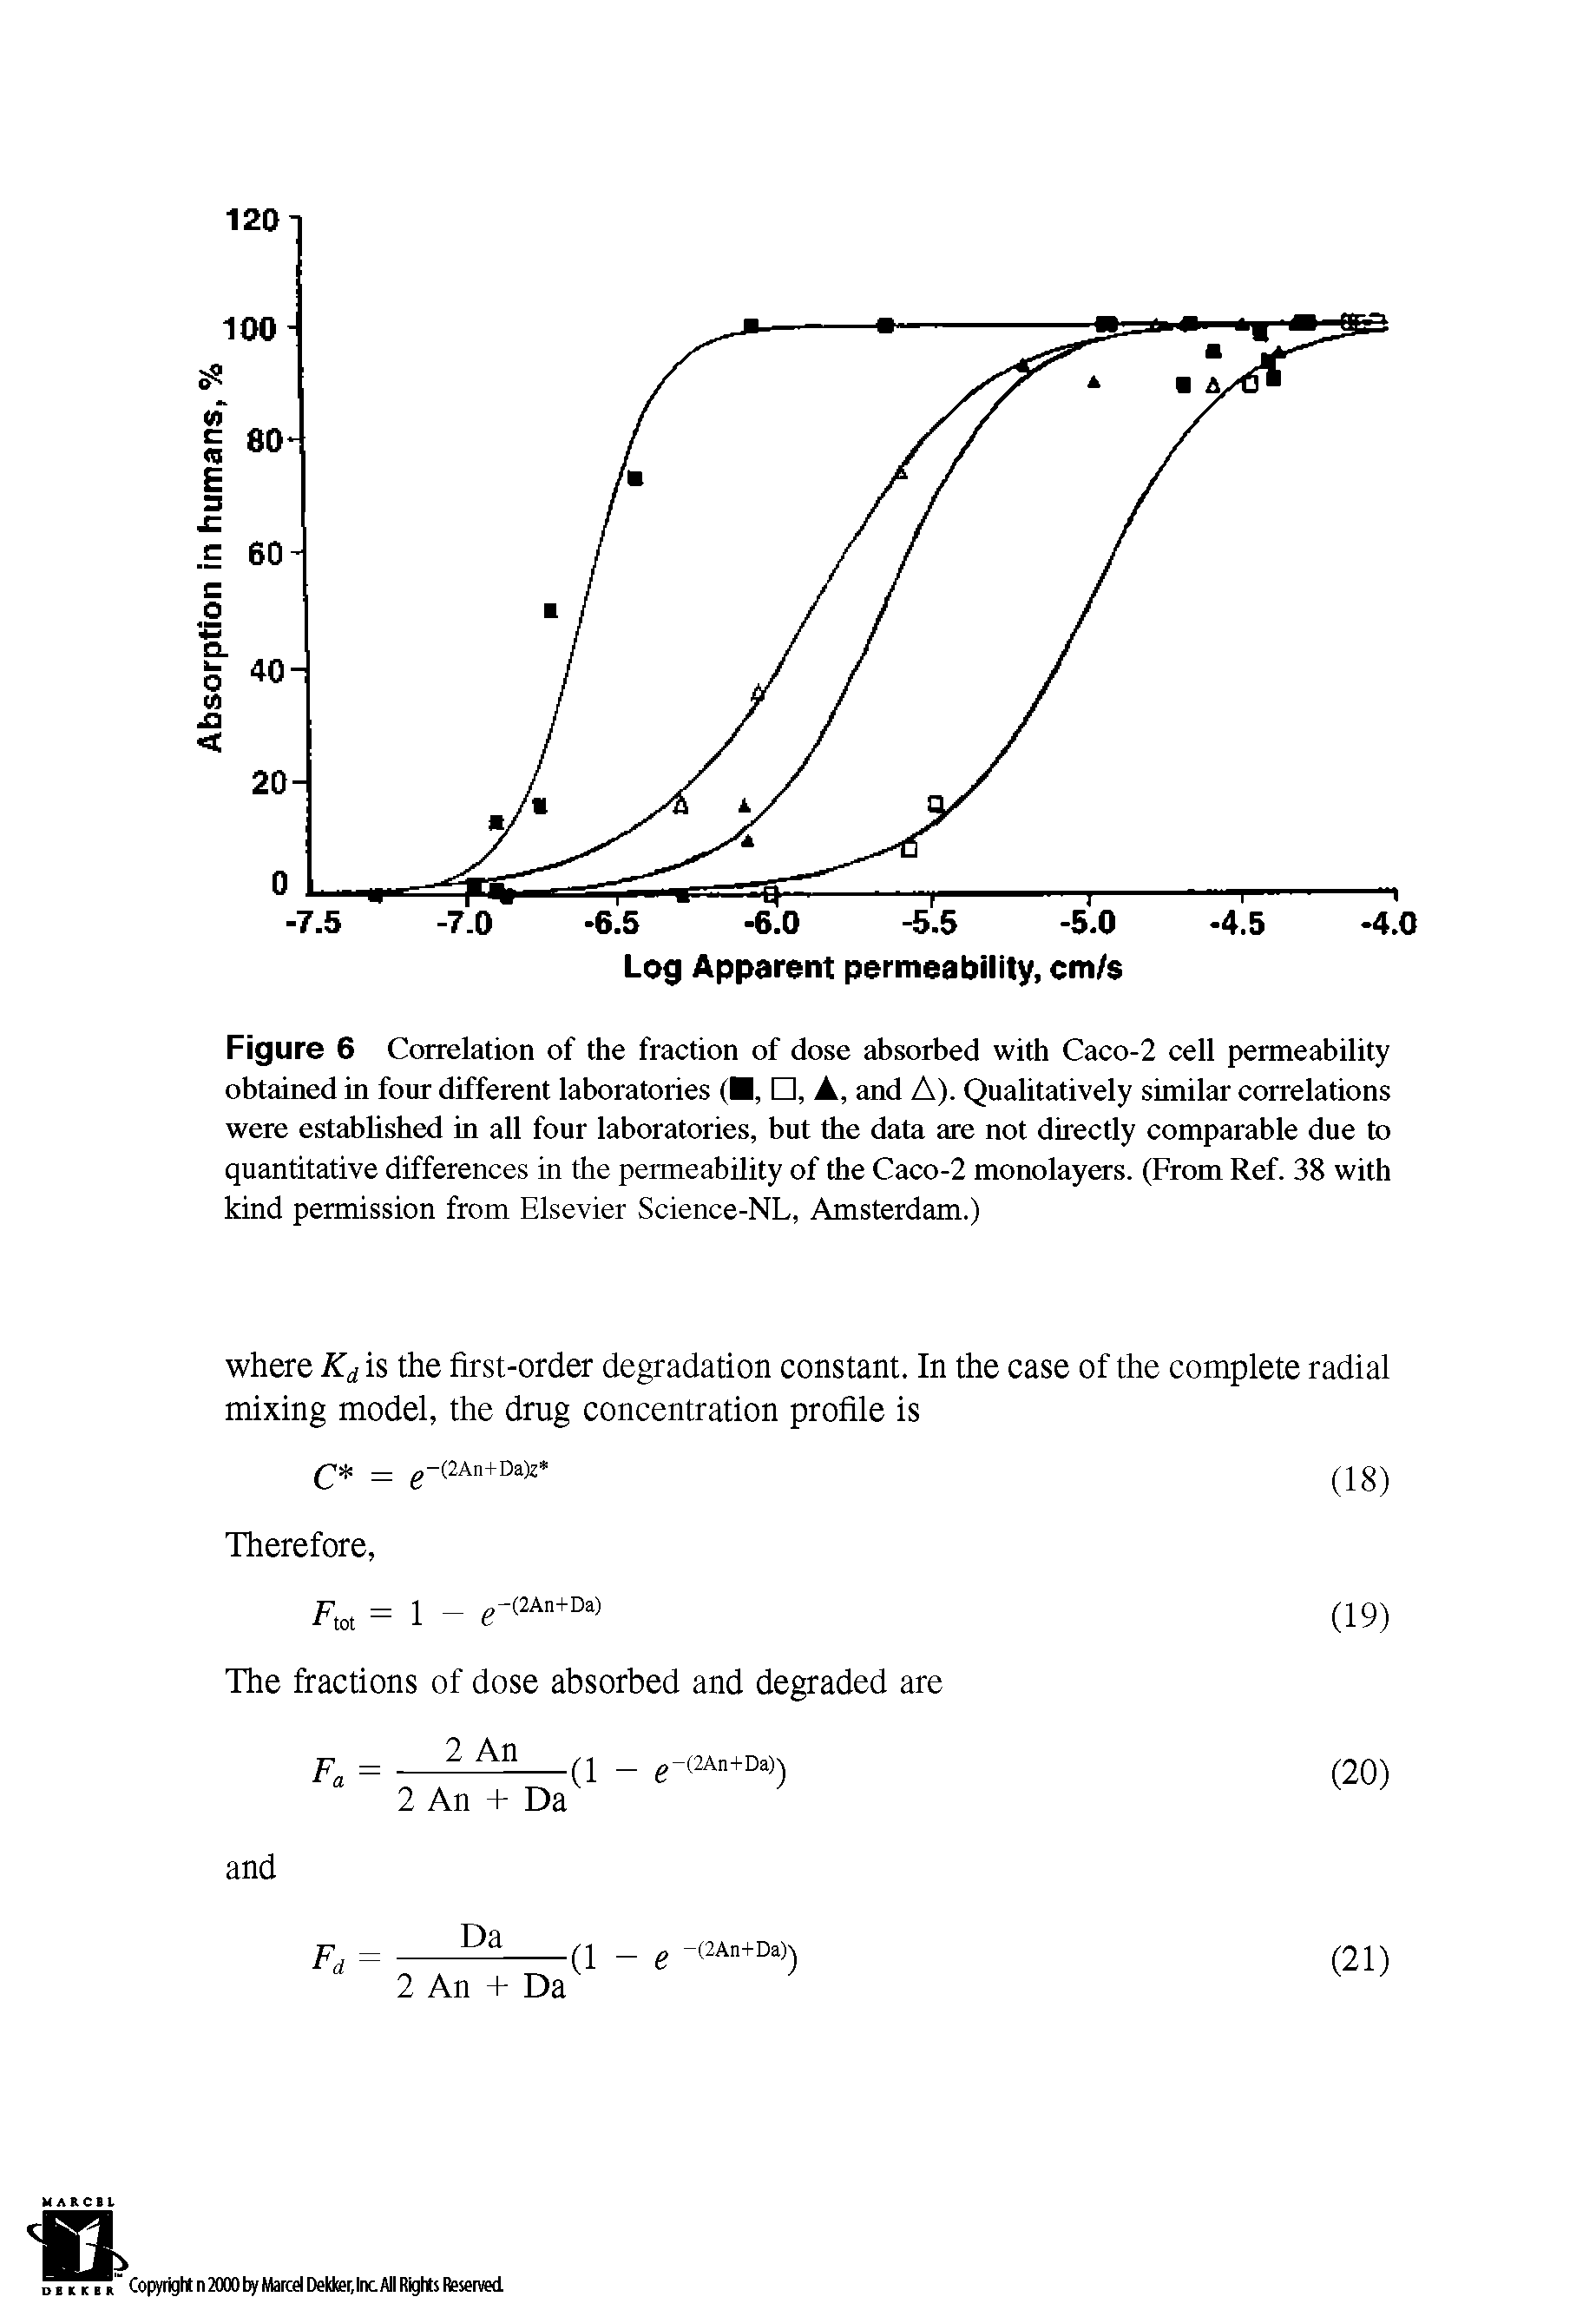 Figure 6 Correlation of the fraction of dose absorbed with Caco-2 cell permeability obtained in four different laboratories ( , , A, and A). Qualitatively similar correlations were established in all four laboratories, but the data are not directly comparable due to quantitative differences in the permeability of the Caco-2 monolayers. (From Ref. 38 with kind permission from Elsevier Science-NL, Amsterdam.)...